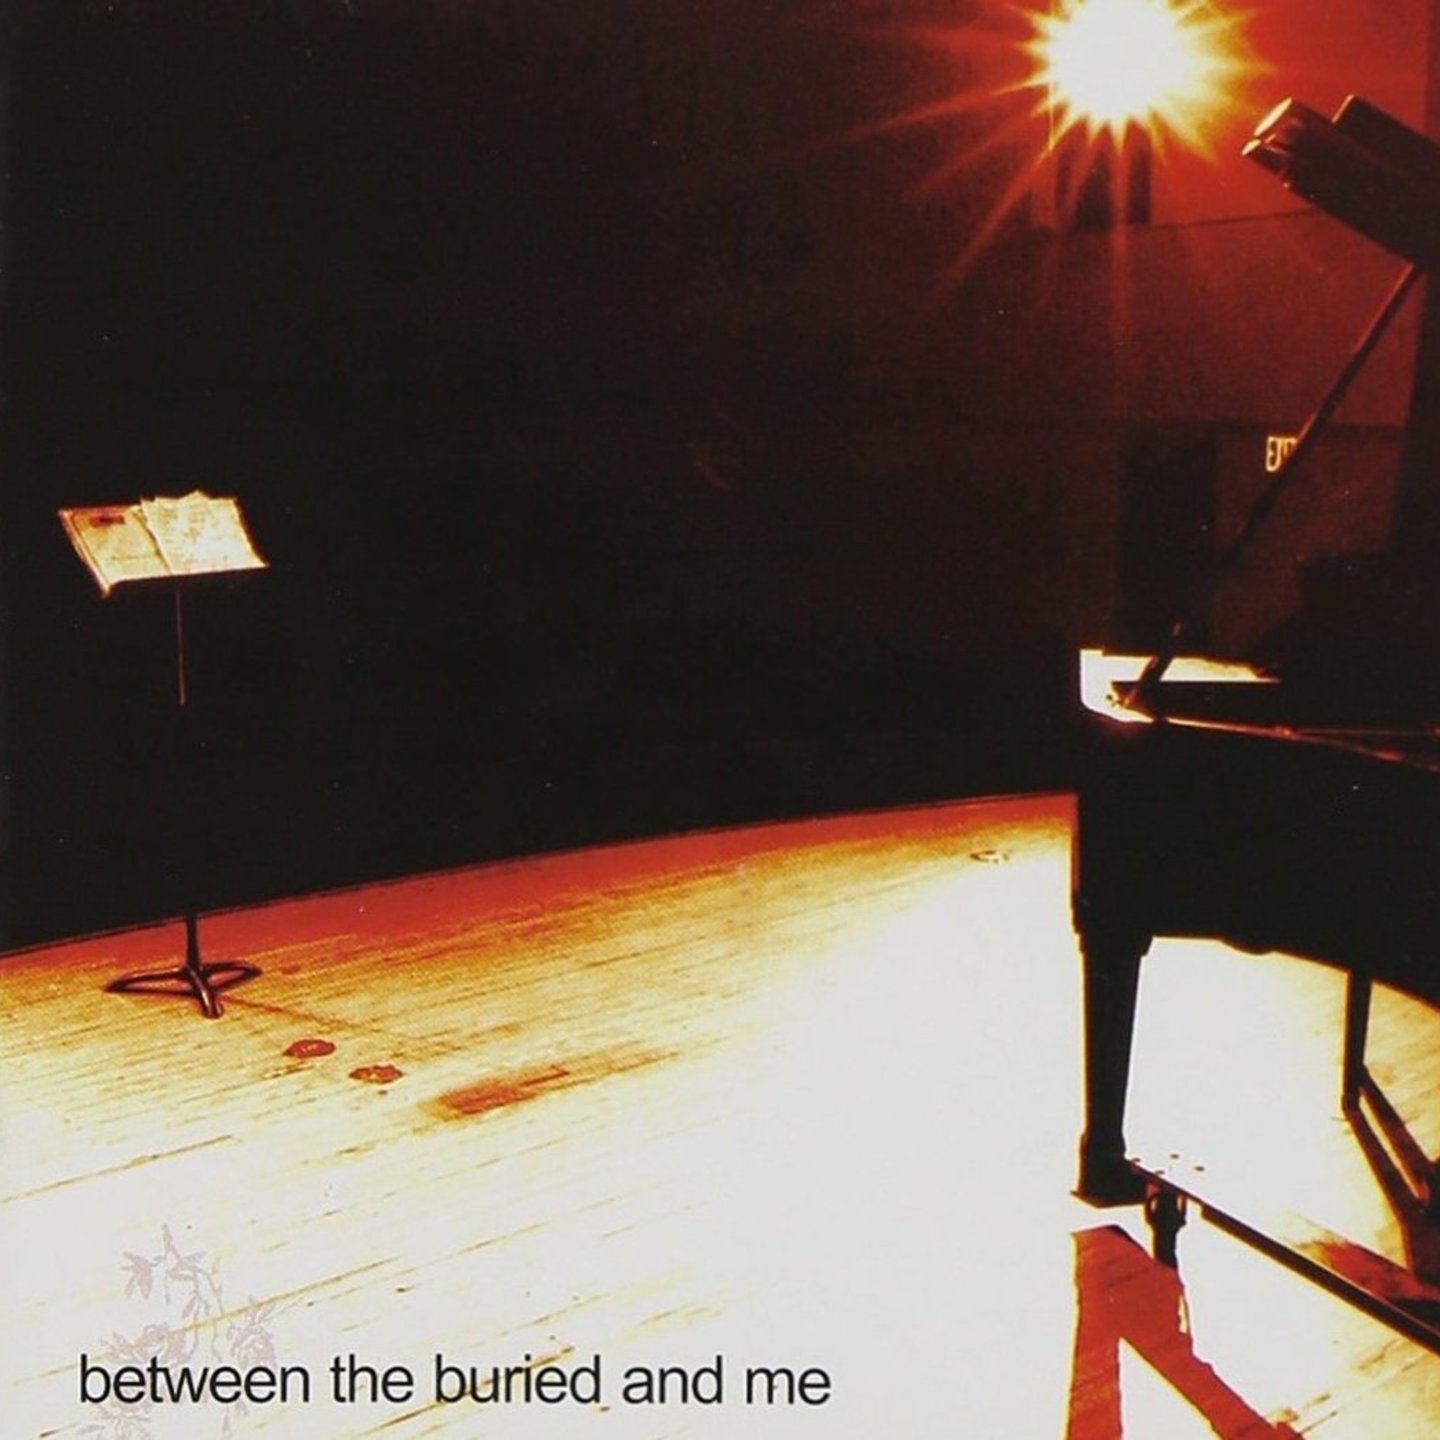 BETWEEN THE BURIED AND ME - Self-Titled LP